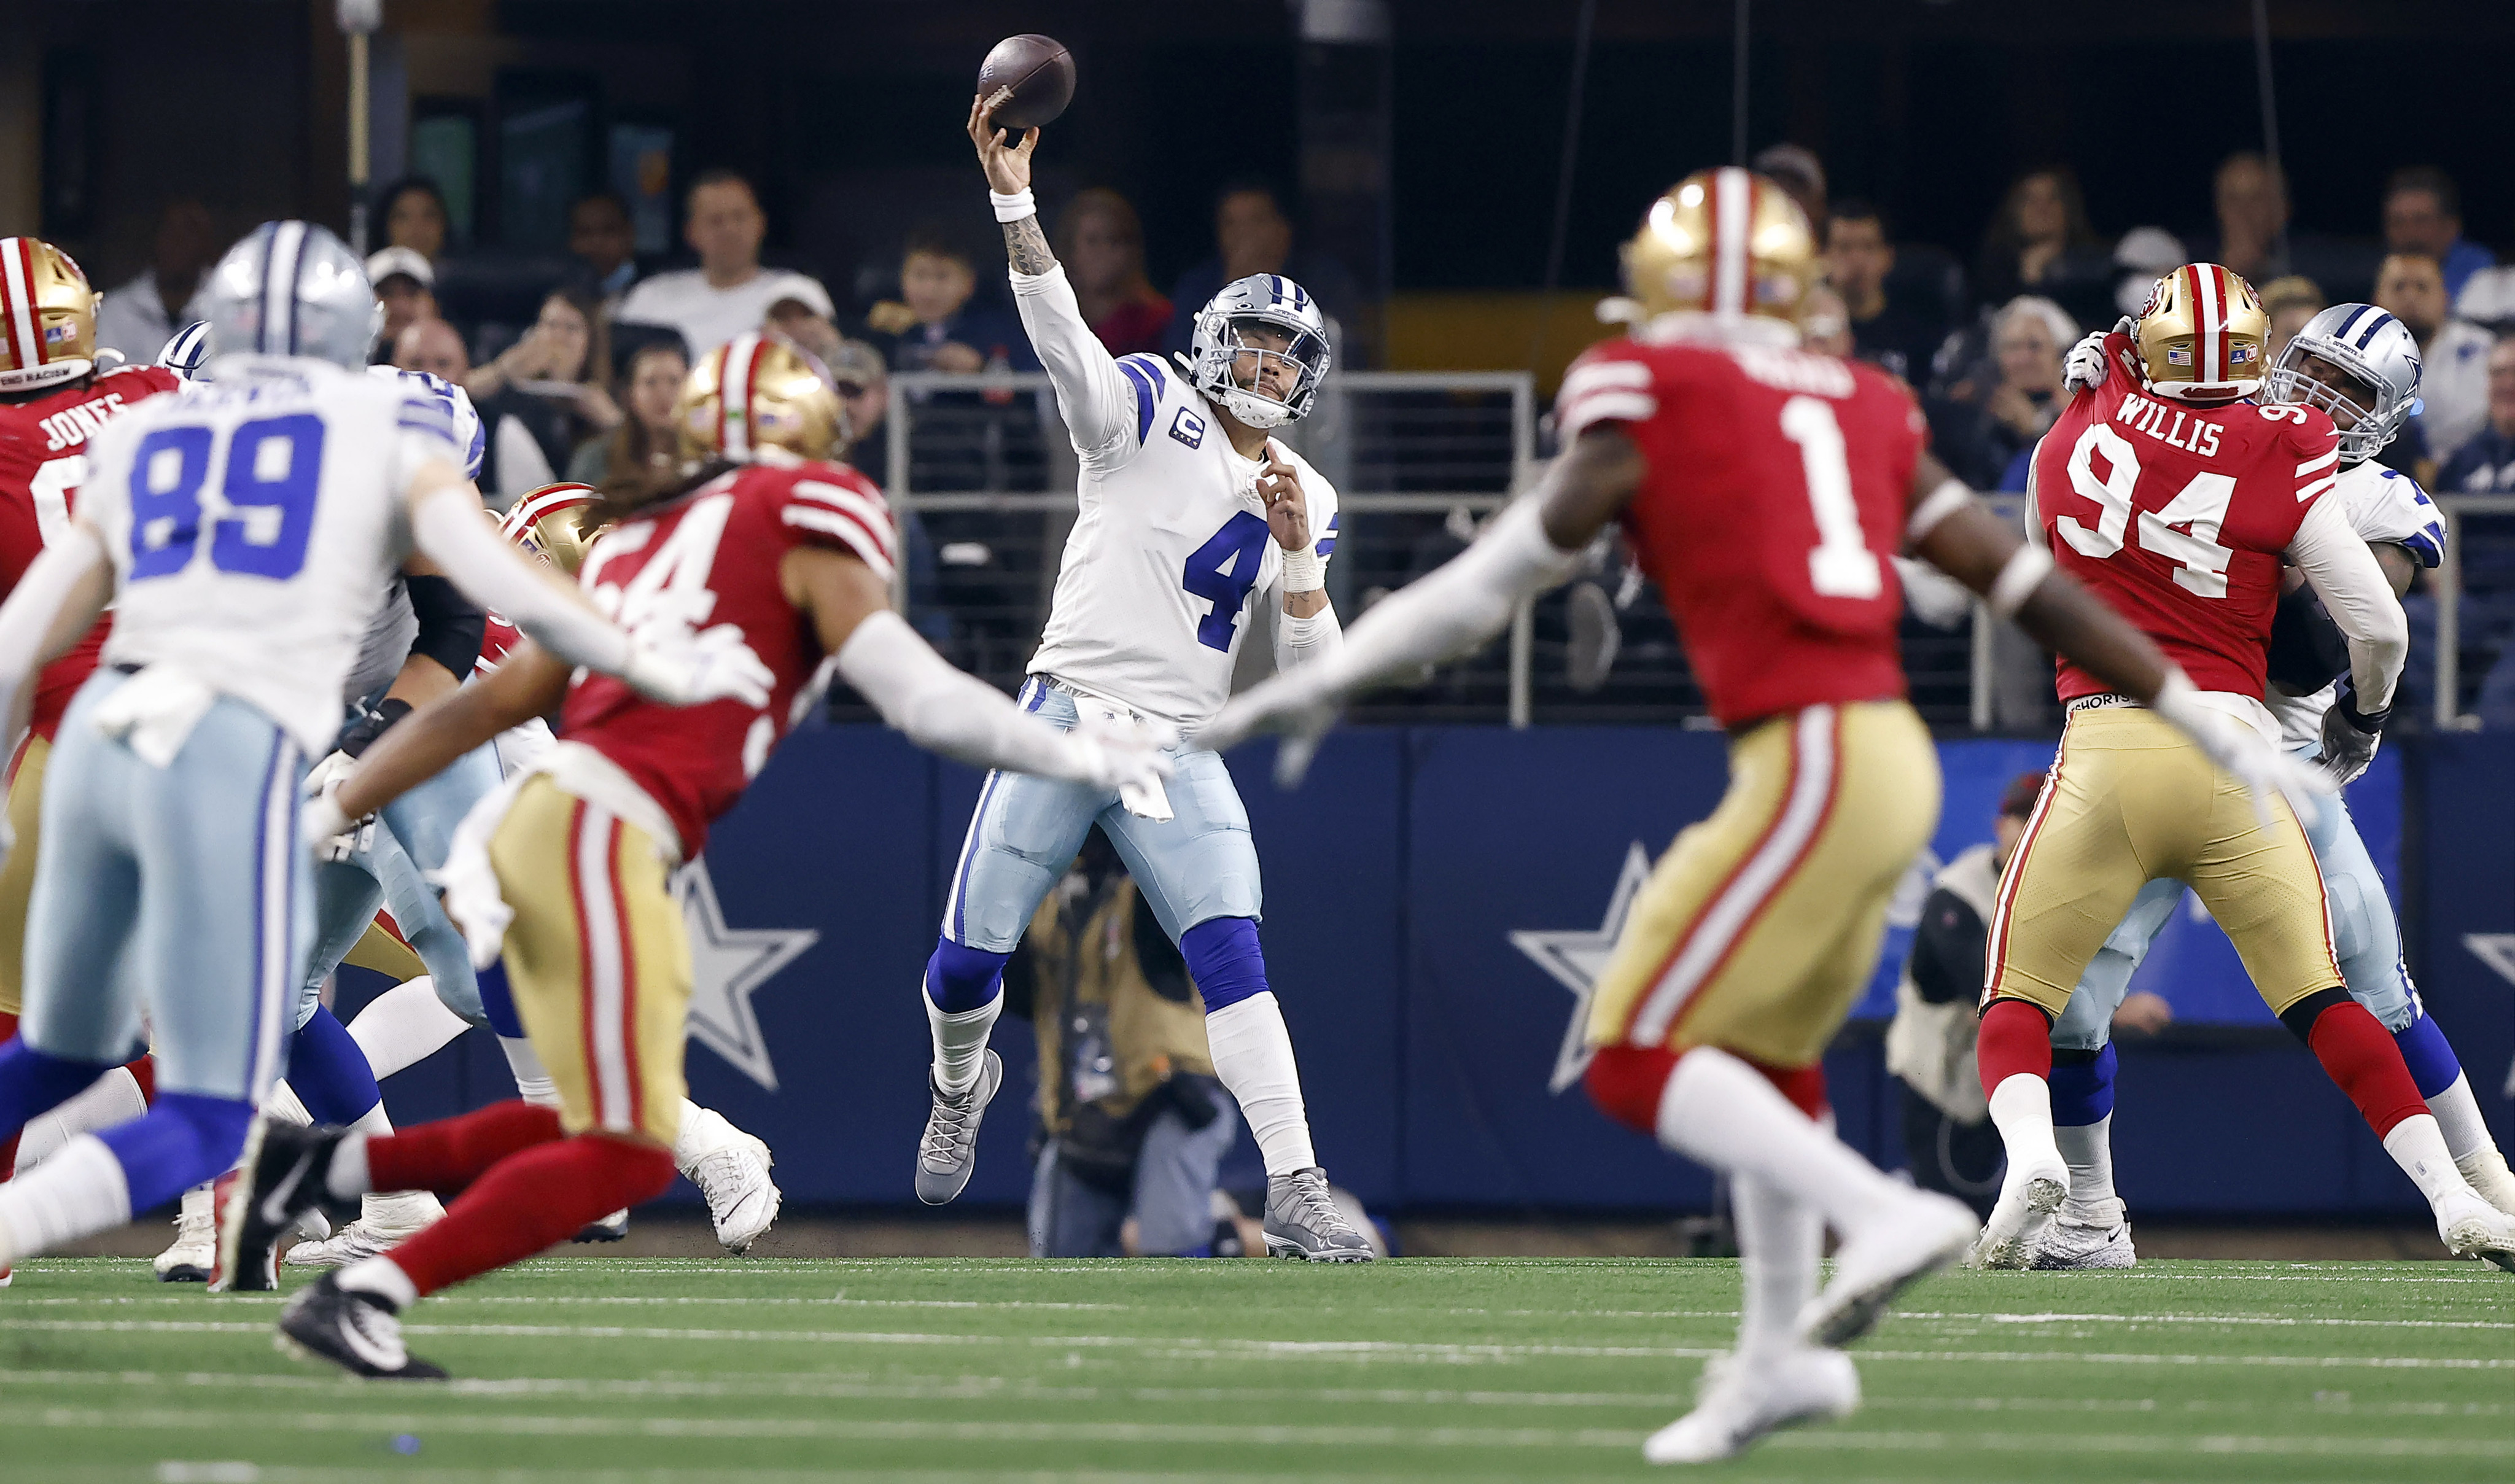 Hot ticket: Cowboys-49ers is the NFL's best-selling divisional